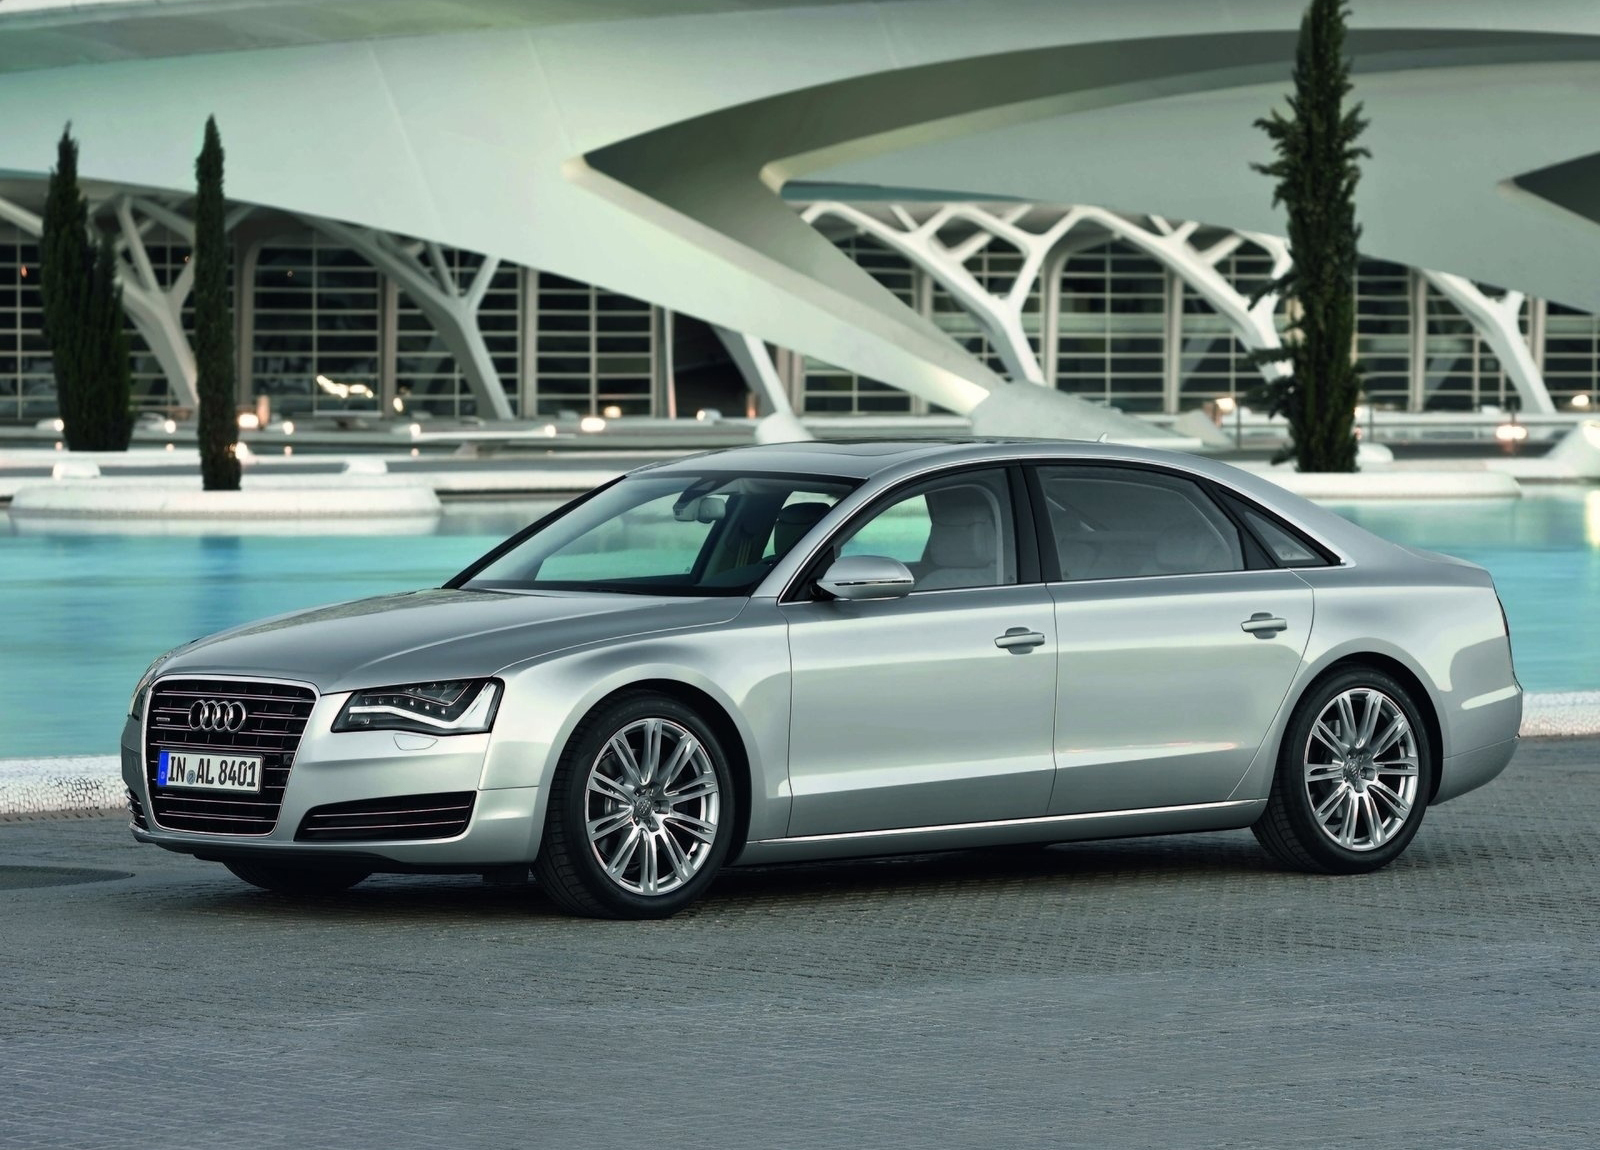 Audi A8 L HD Wallpapers The World Of Audi